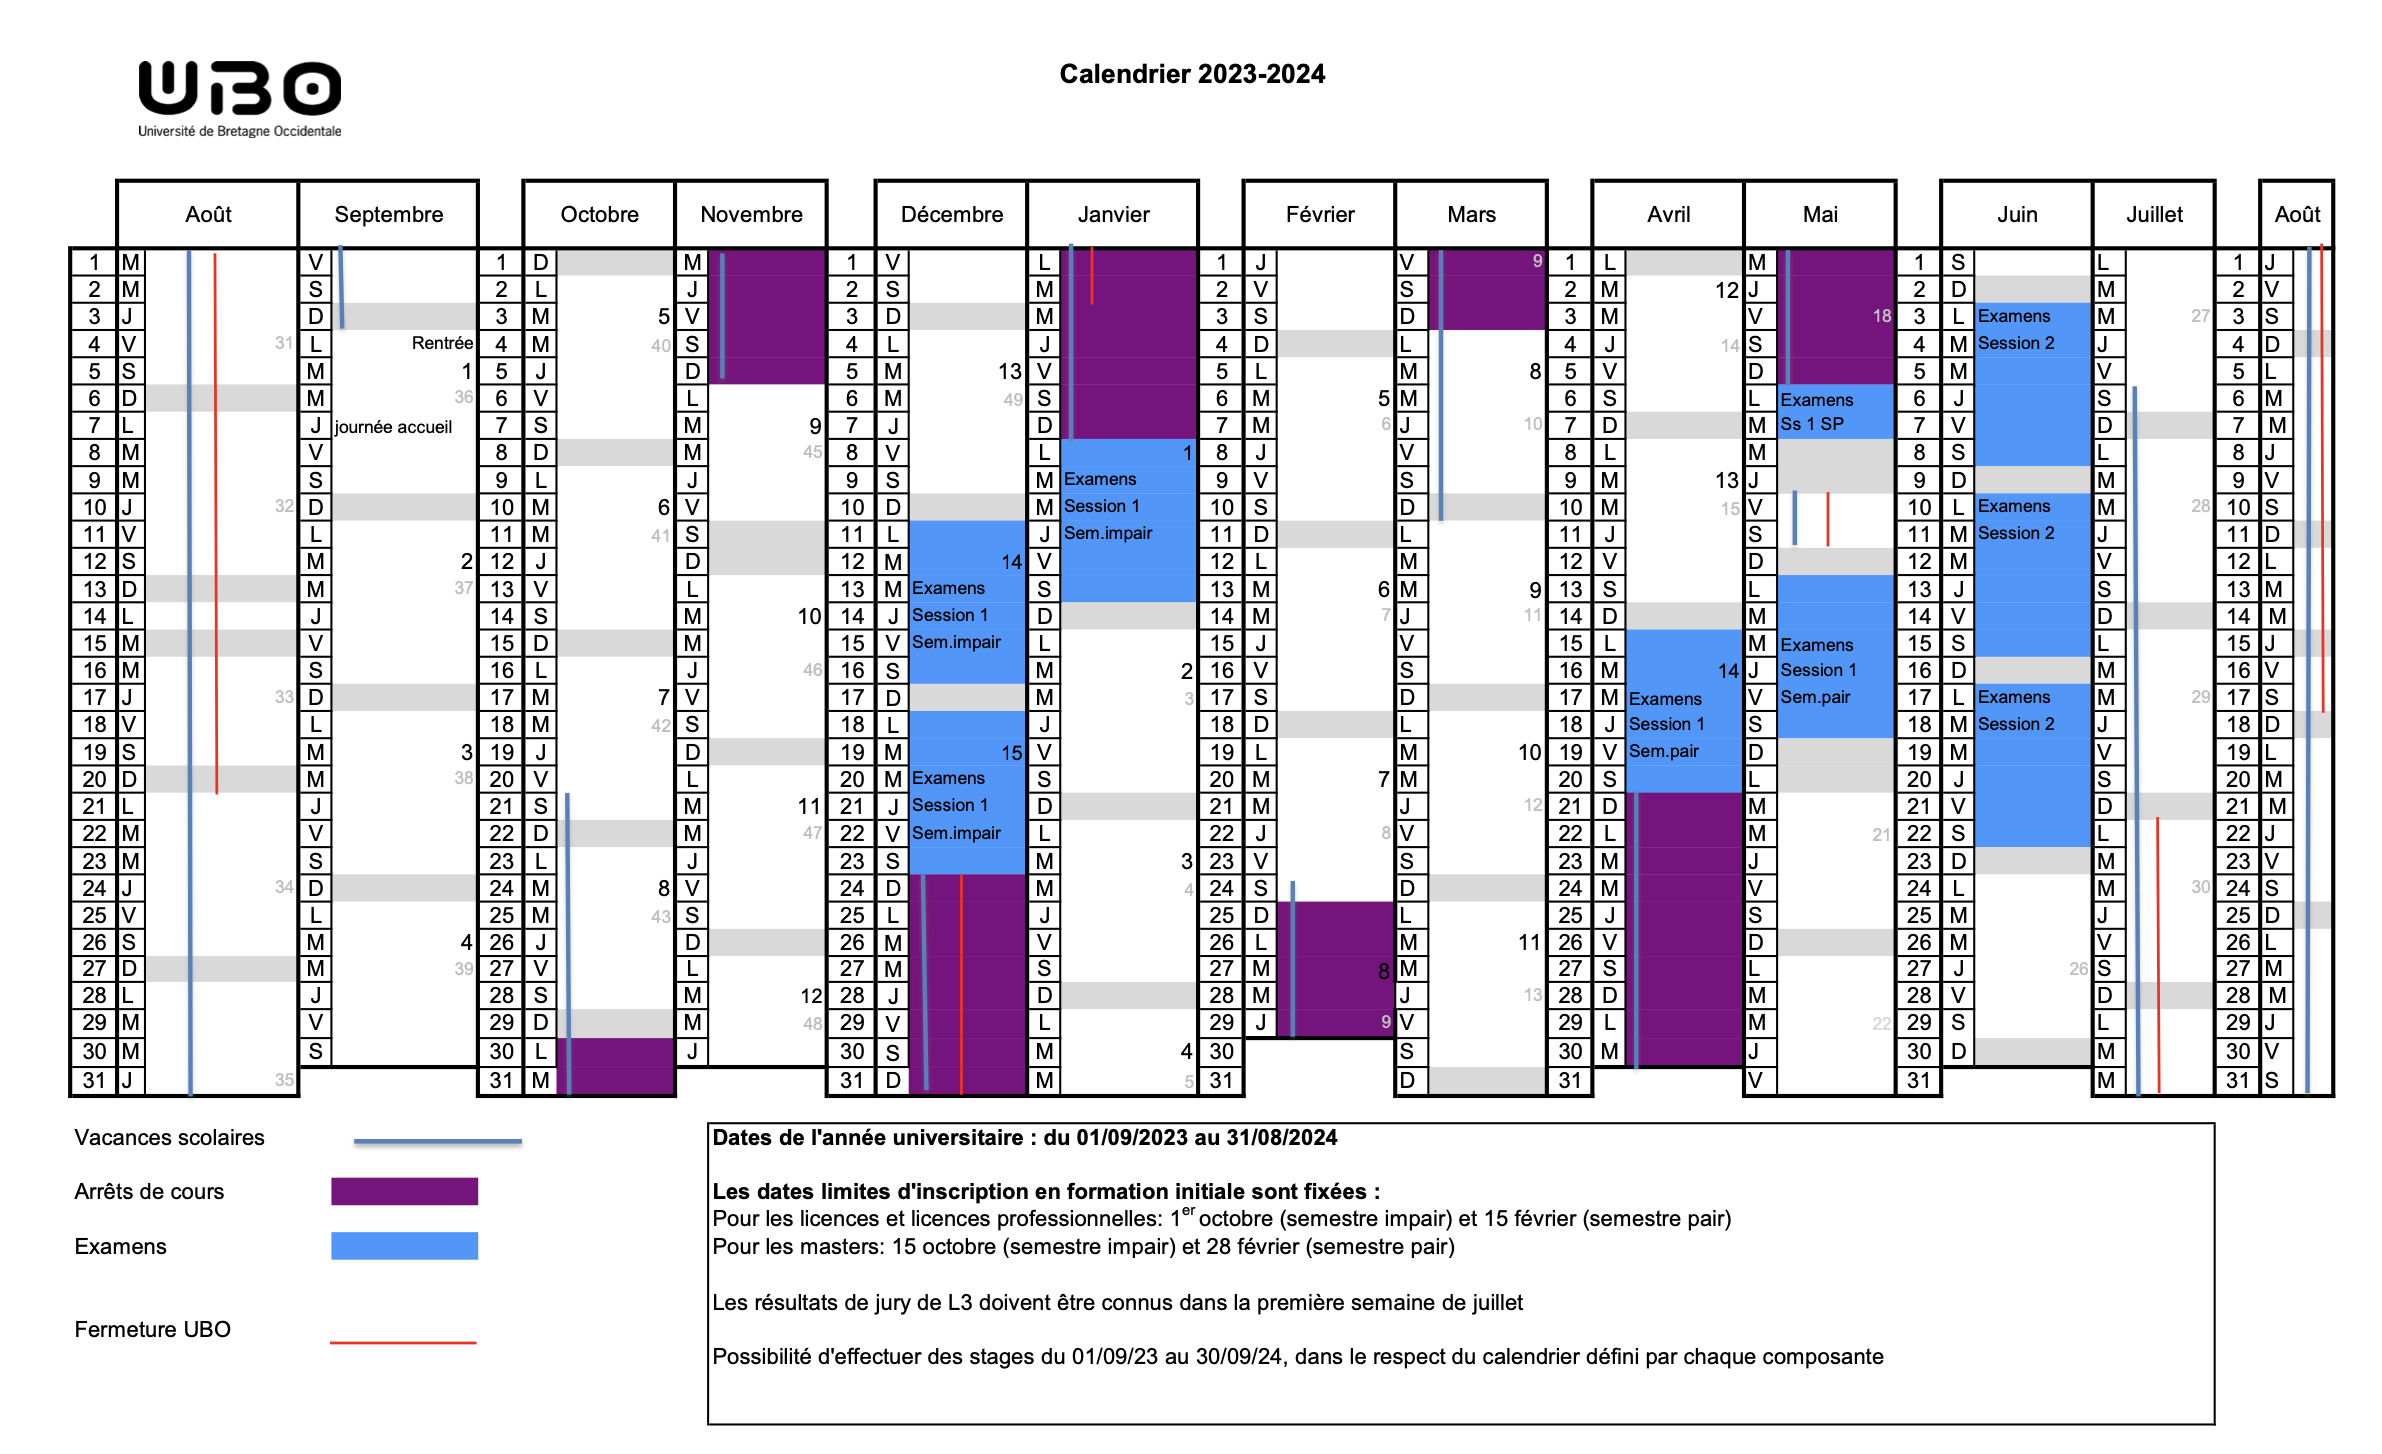 calendrier-annuel-ubo-23-24.png